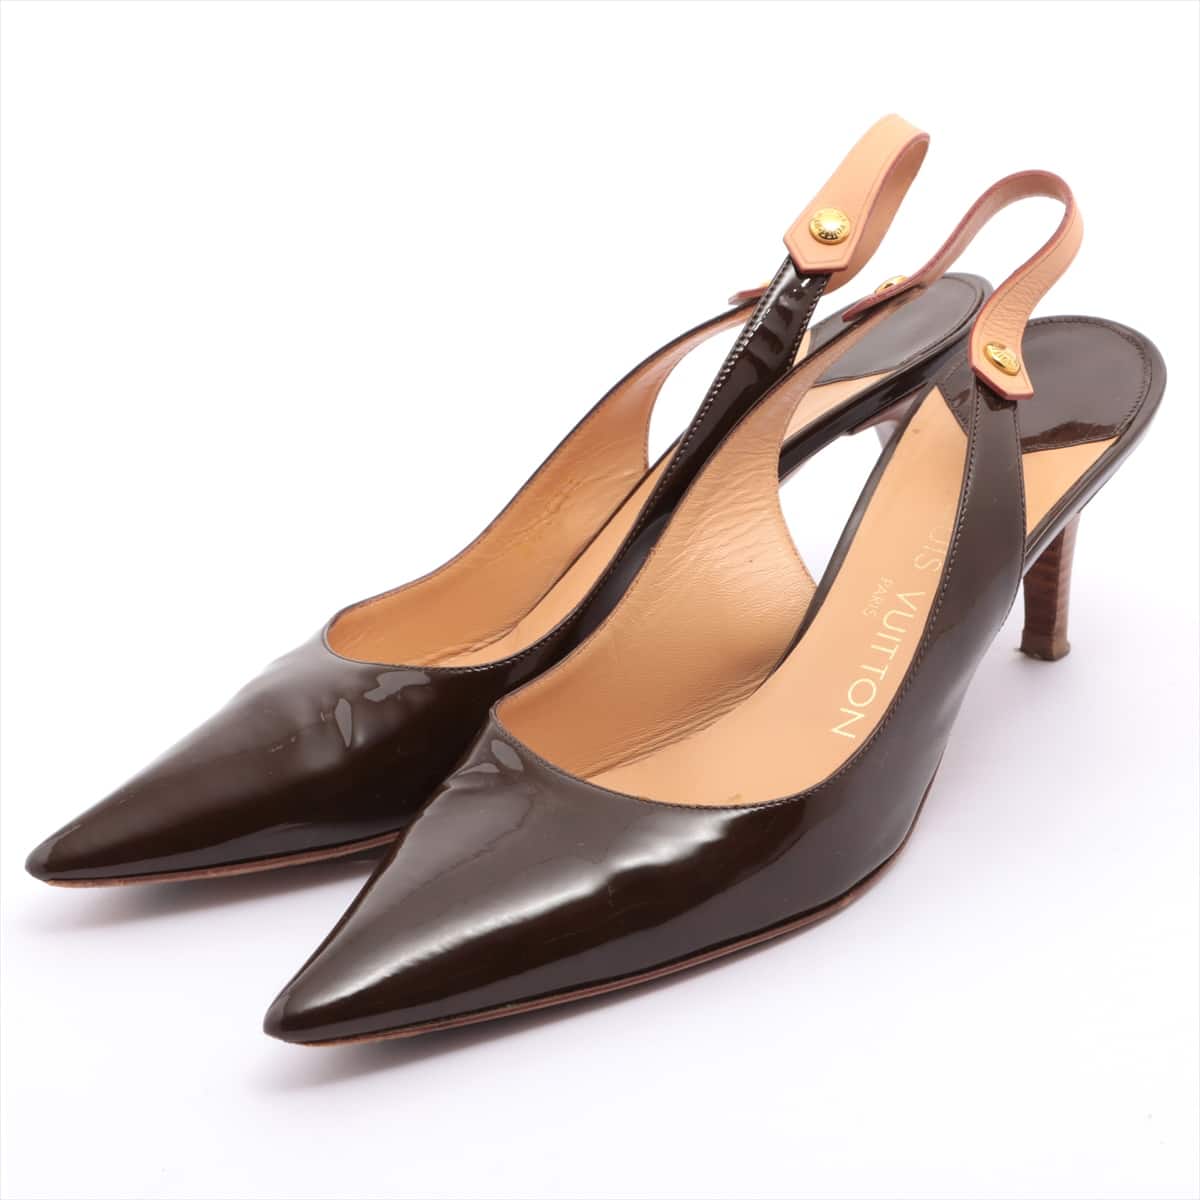 Louis Vuitton B01013 Patent leather Pumps 37 Ladies' Brown There is stickiness throughout the patent